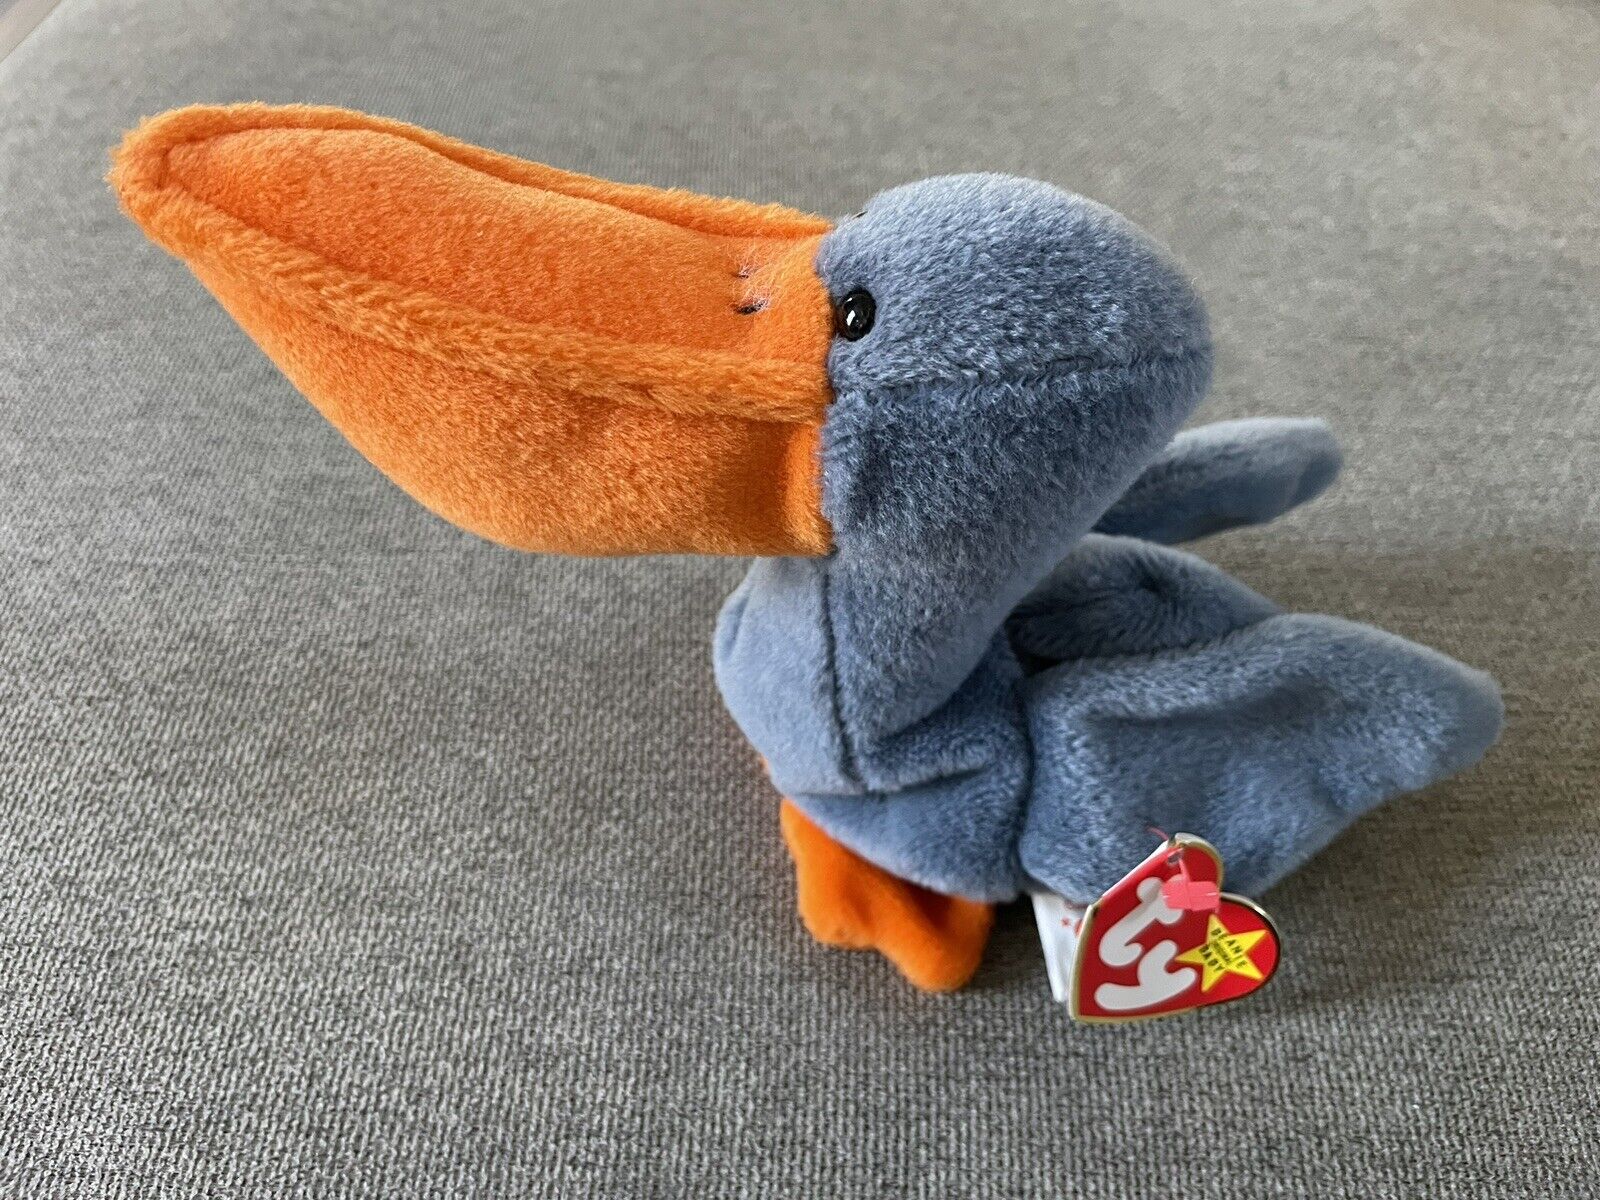 TY BEANIE BABY SCOOP THE PELICAN 1996 W/TAG RARE RETIRED VINTAGE INVESTMENT